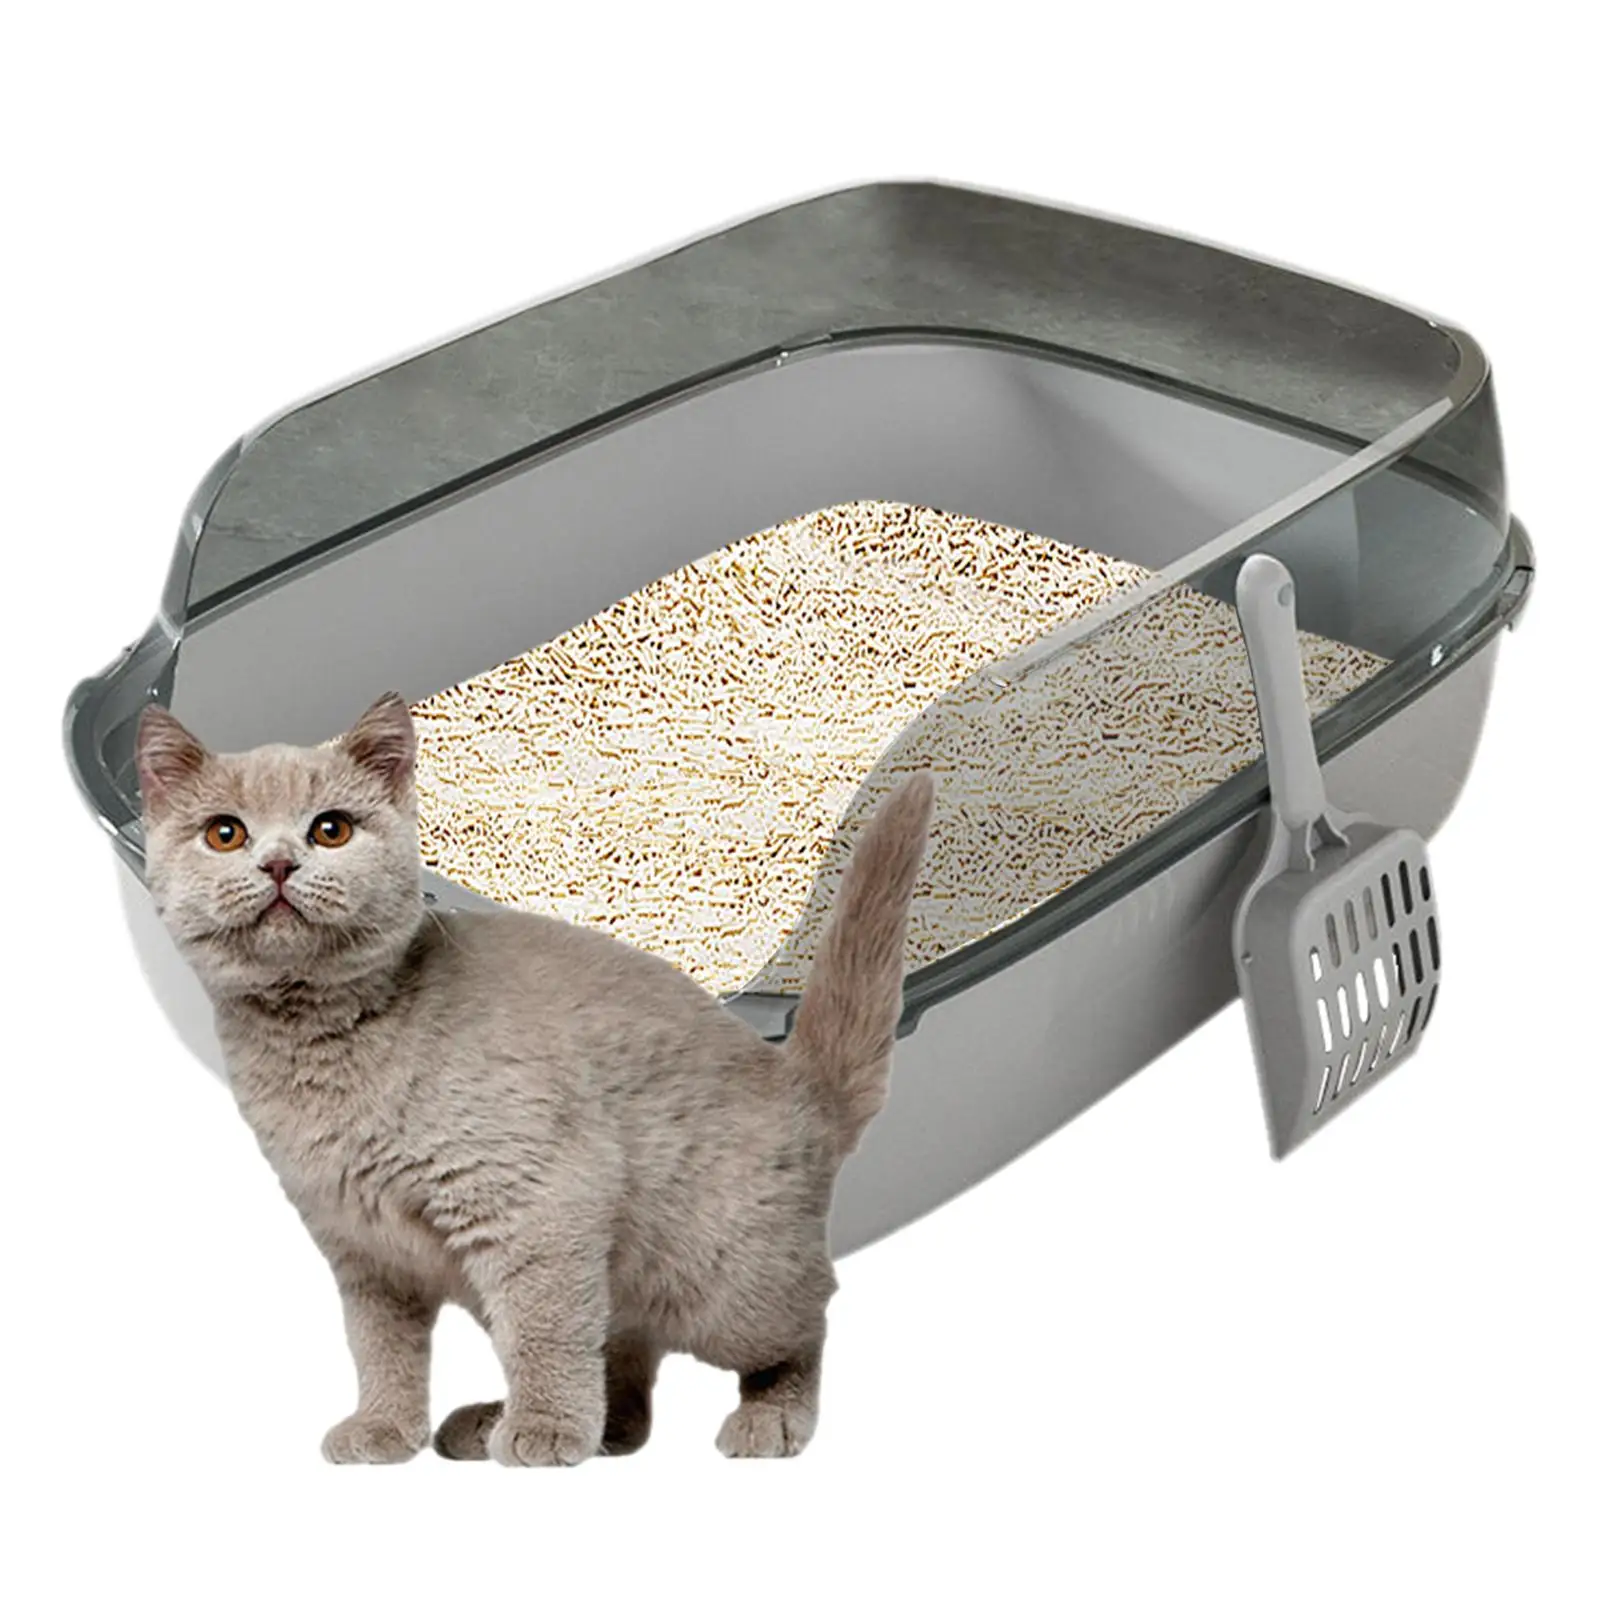 Cat Litter Box Sturdy Semi Enclosed Easy to Clean Litter Tray Cat Kitty